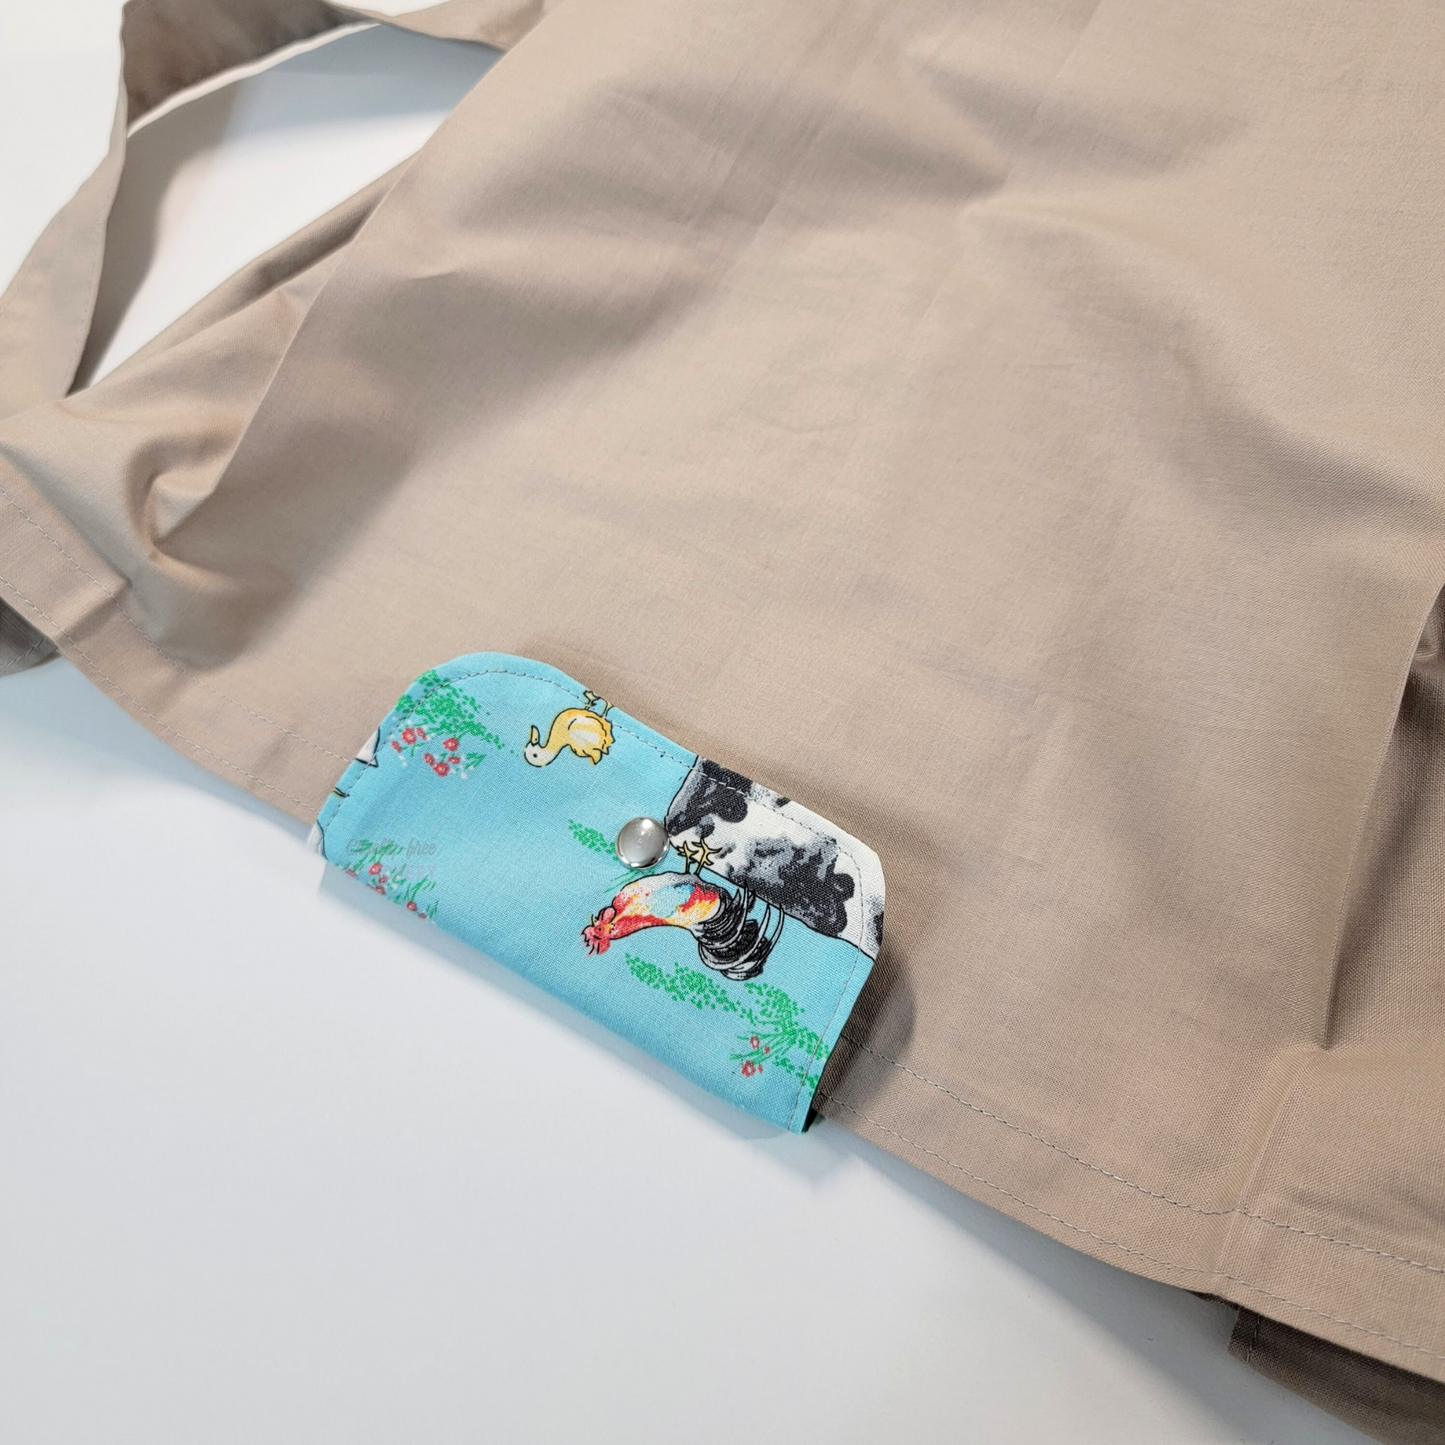 The flap also snaps to the top of the bag to close it while in use.